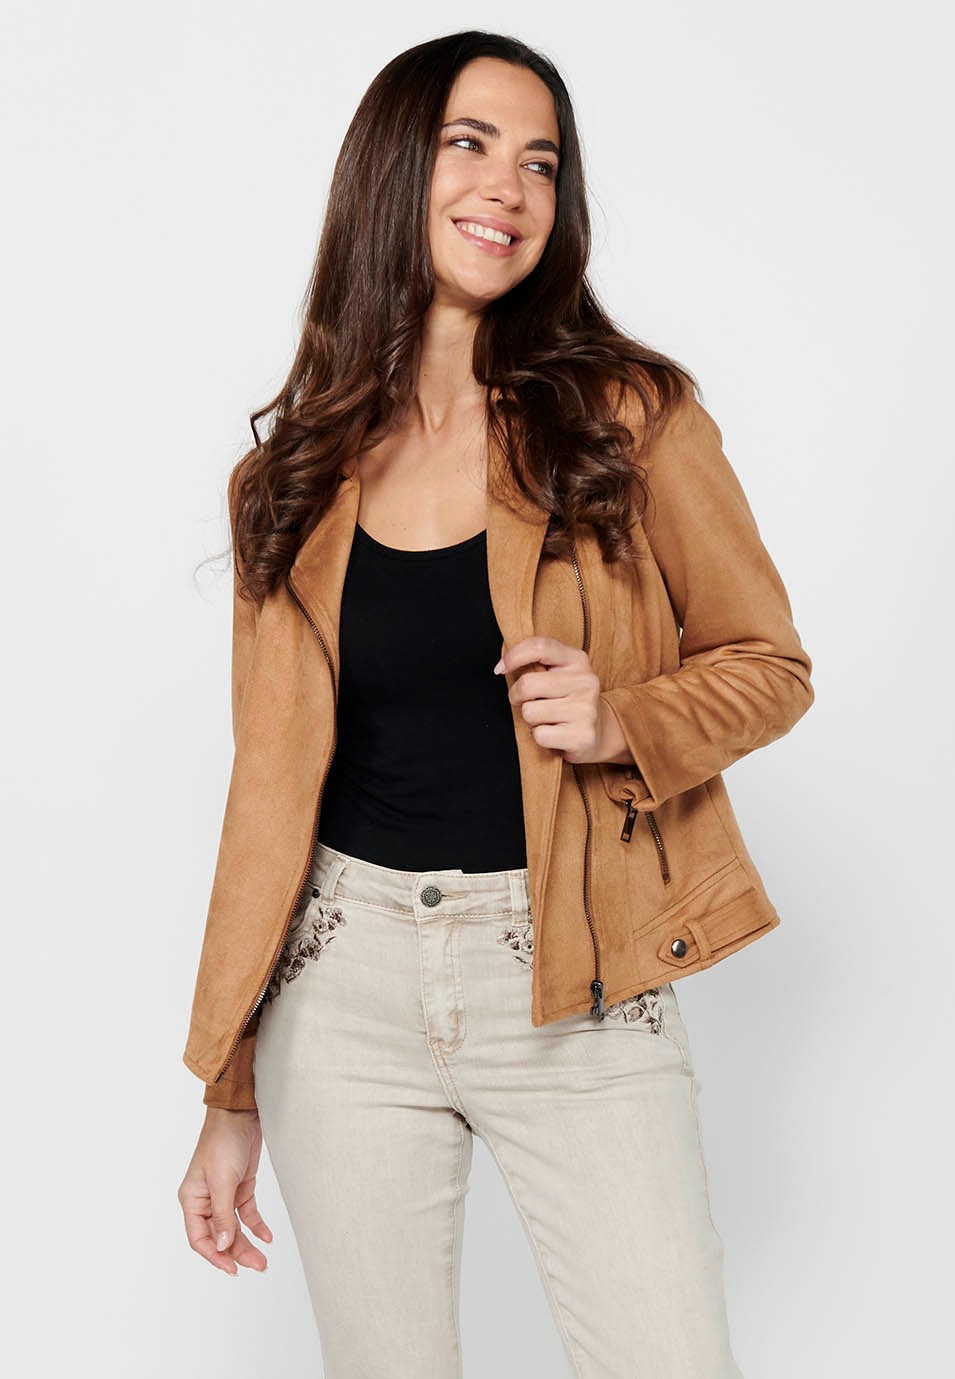 Camel Color Long Sleeve Jacket with Cross-Zip Closure with Lapel Collar and Pockets for Women 10